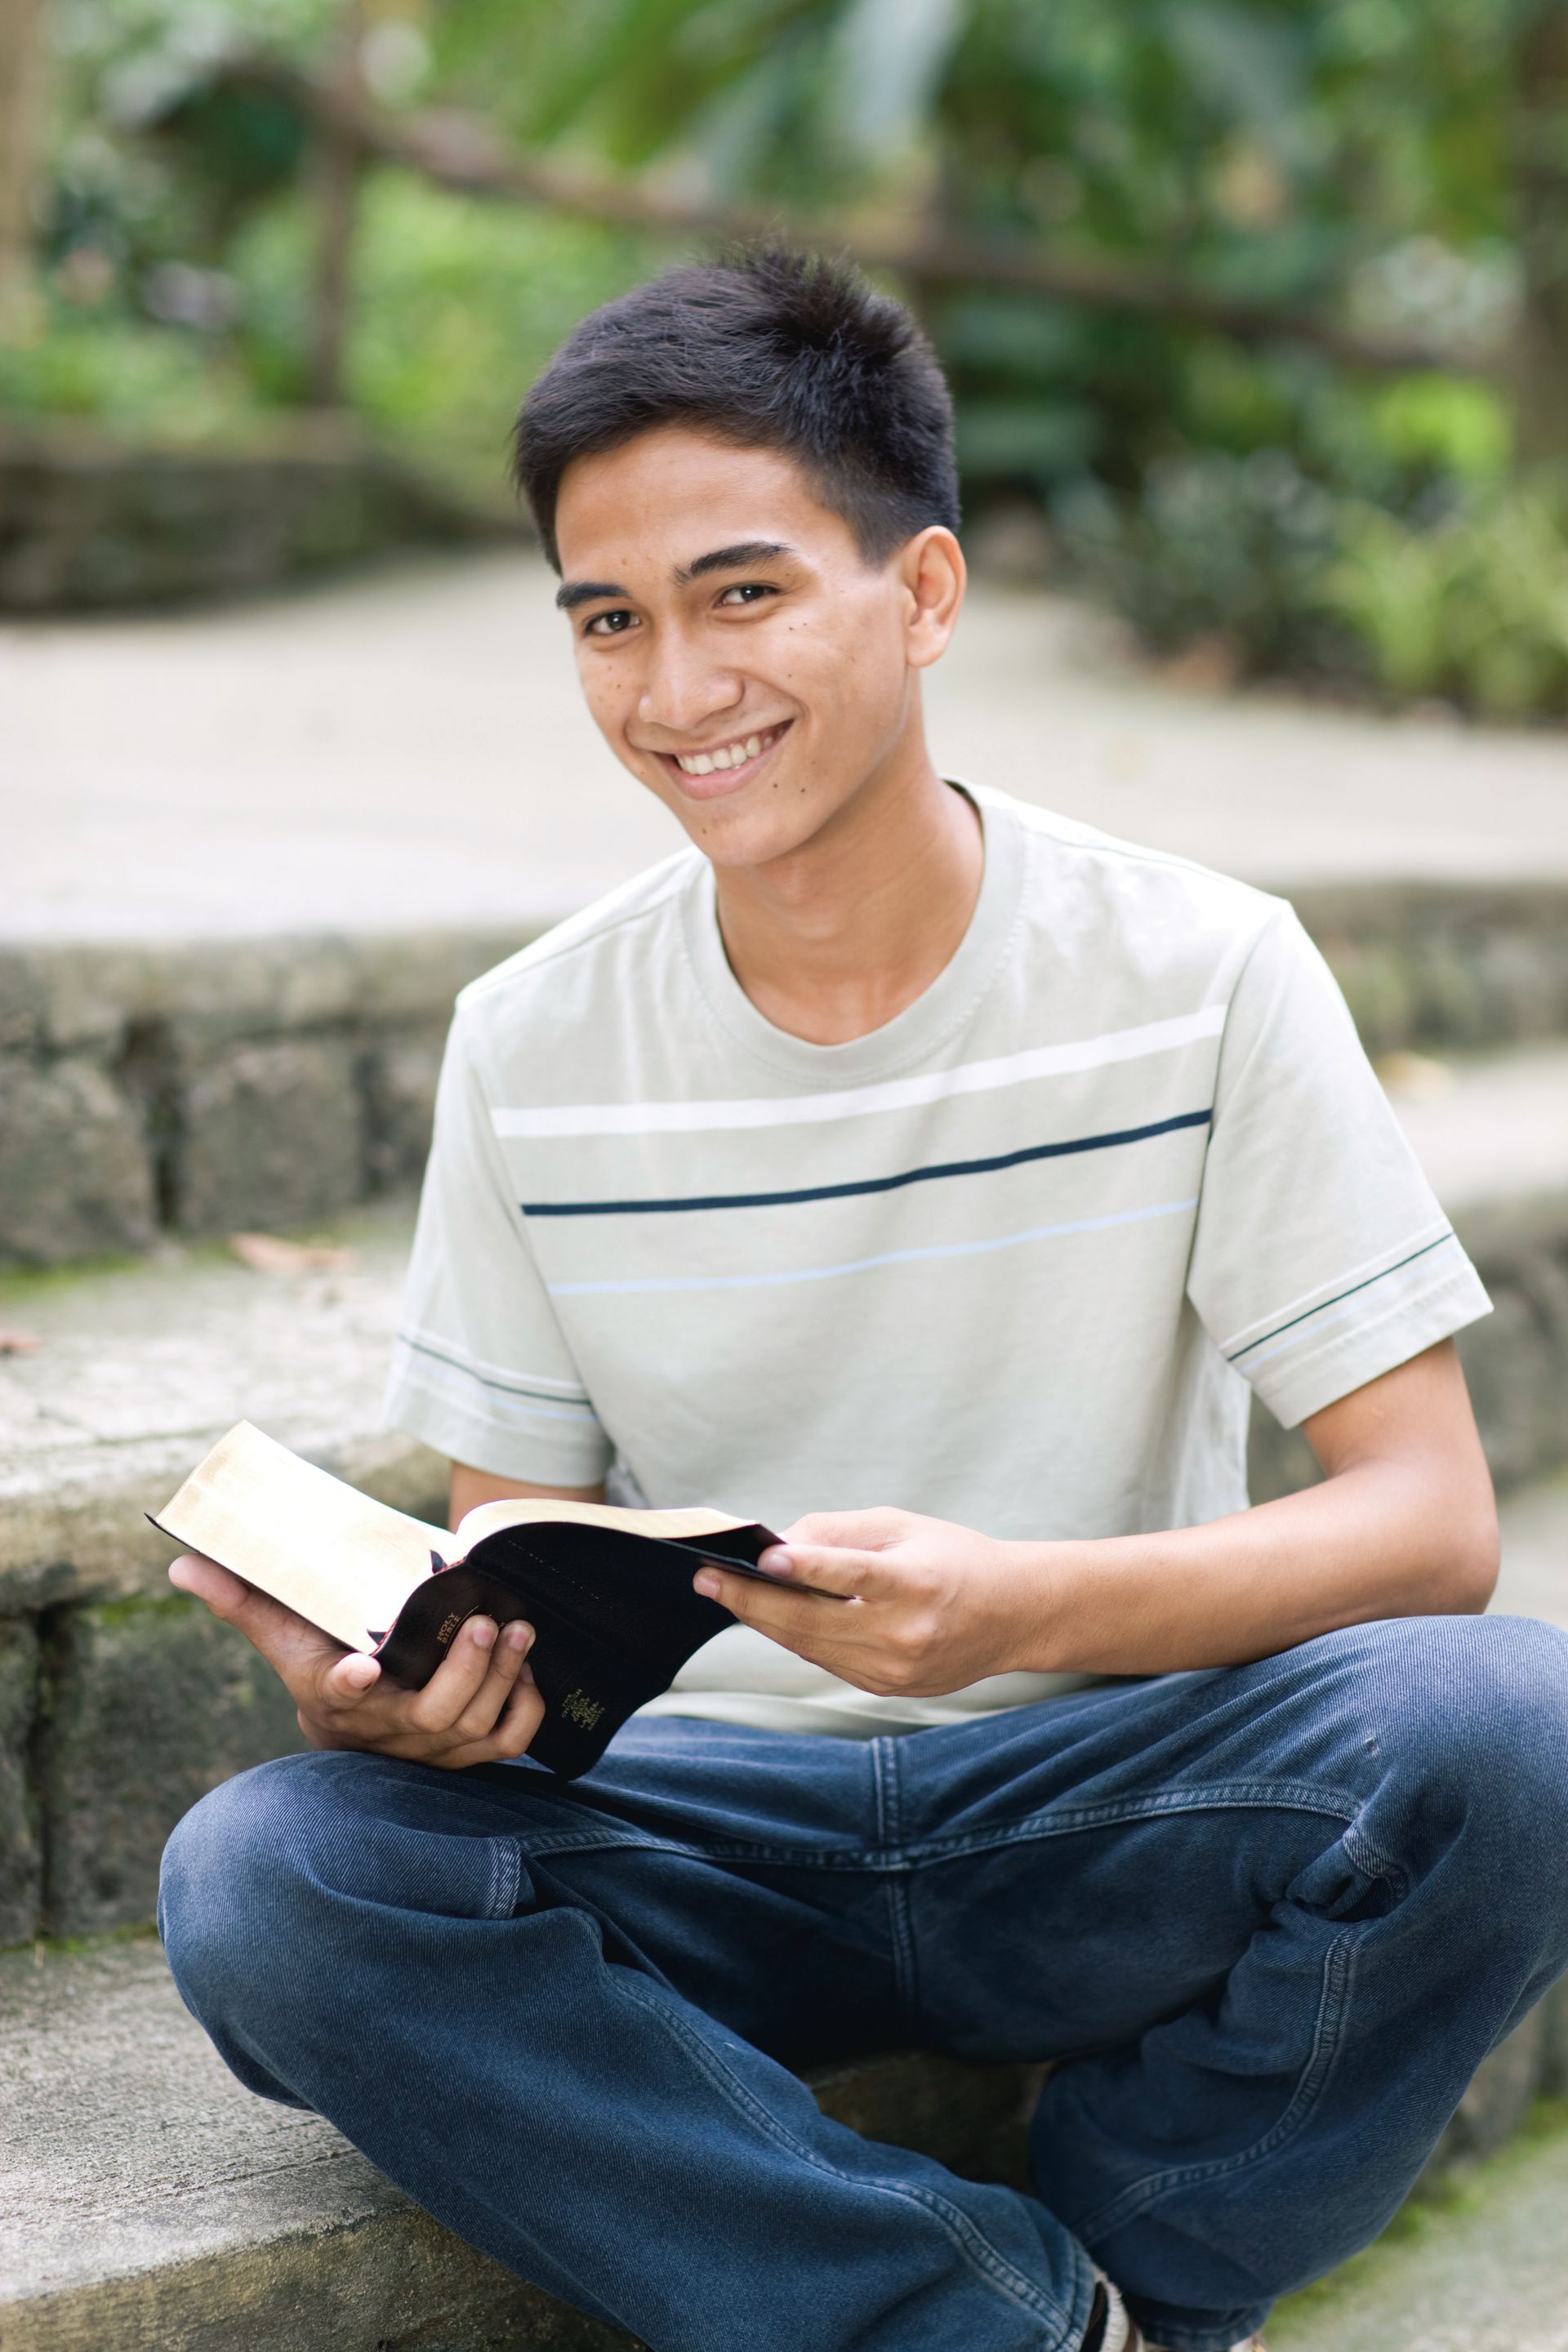 A young man sits outside on steps, with his scriptures open in his hands.